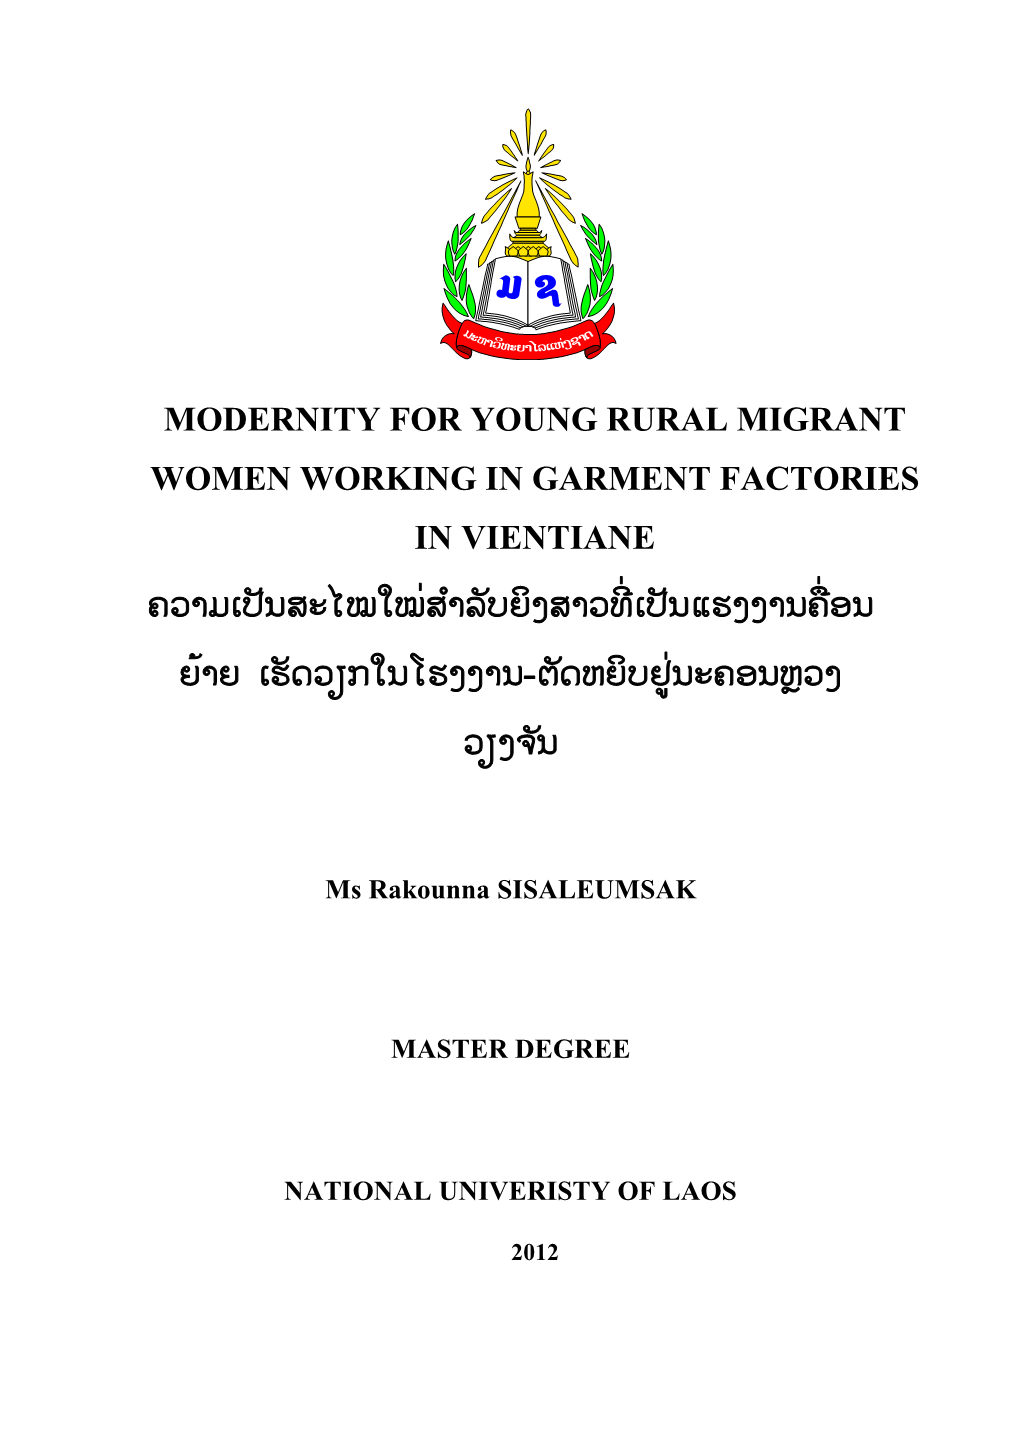 Modernity for Young Rural Migrant Women Working in Garment Factories in Vientiane